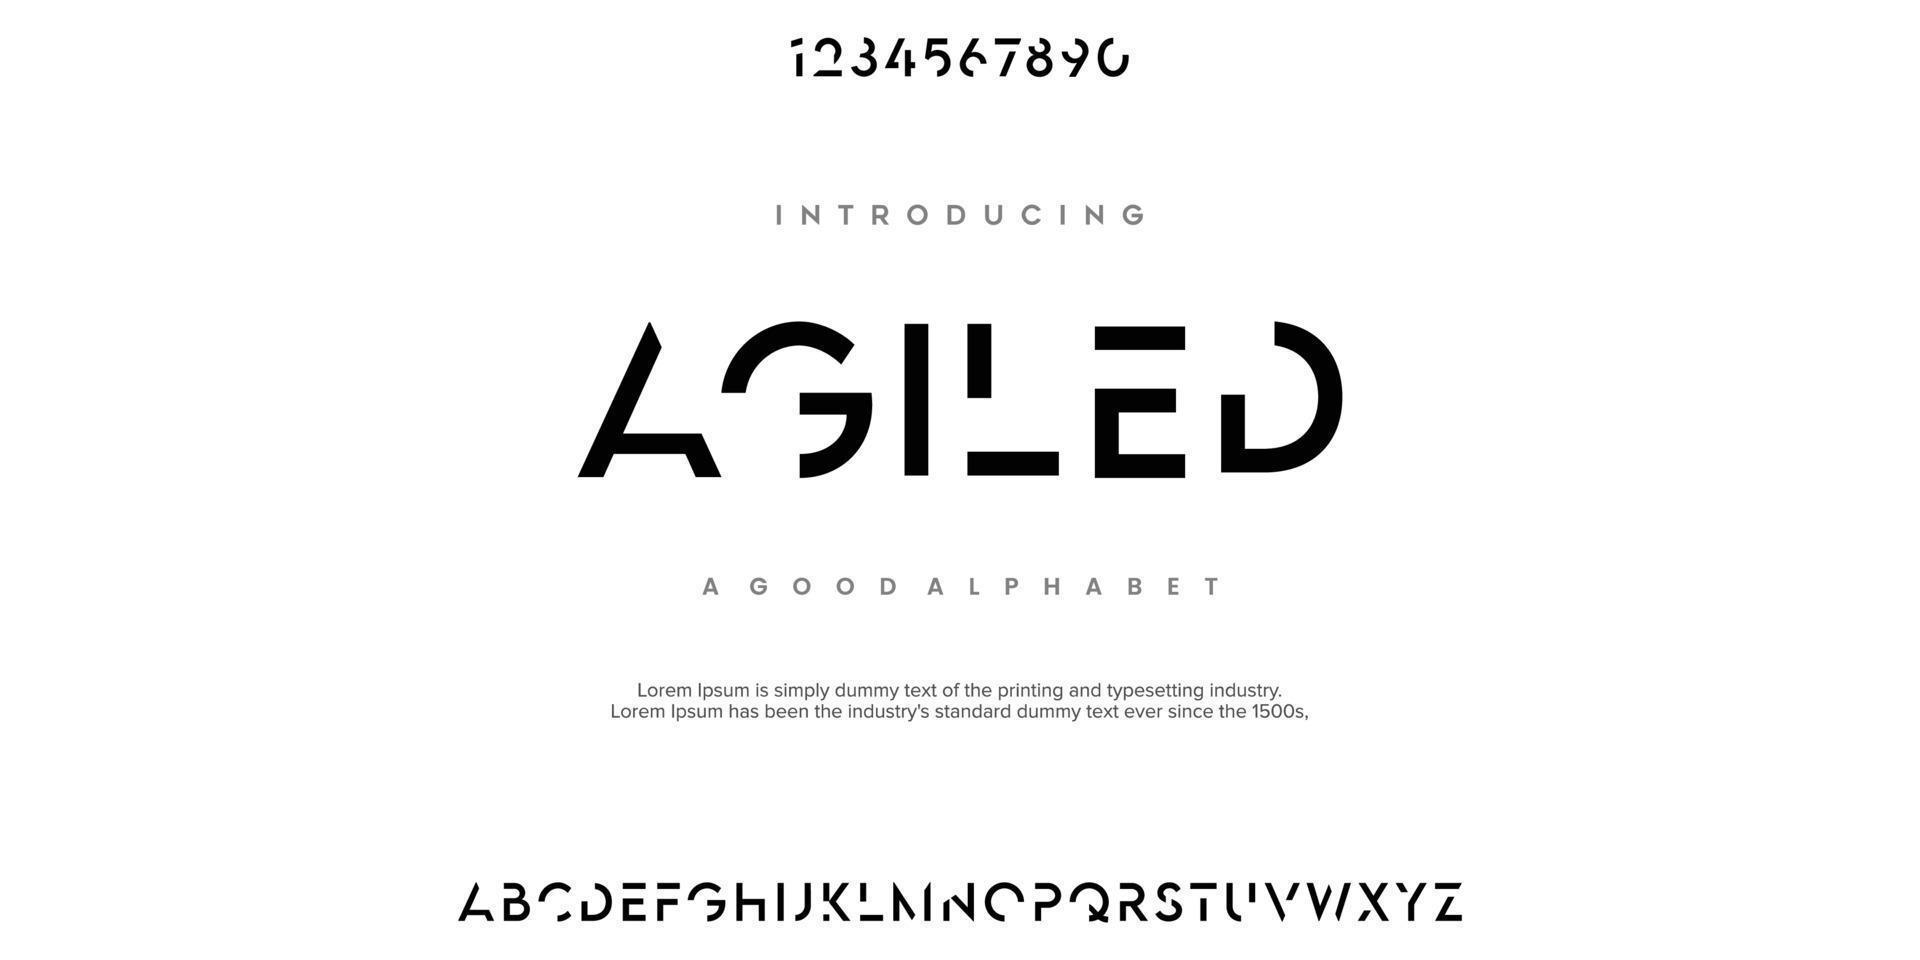 AGILED Modern minimal abstract alphabet fonts. Typography technology ...